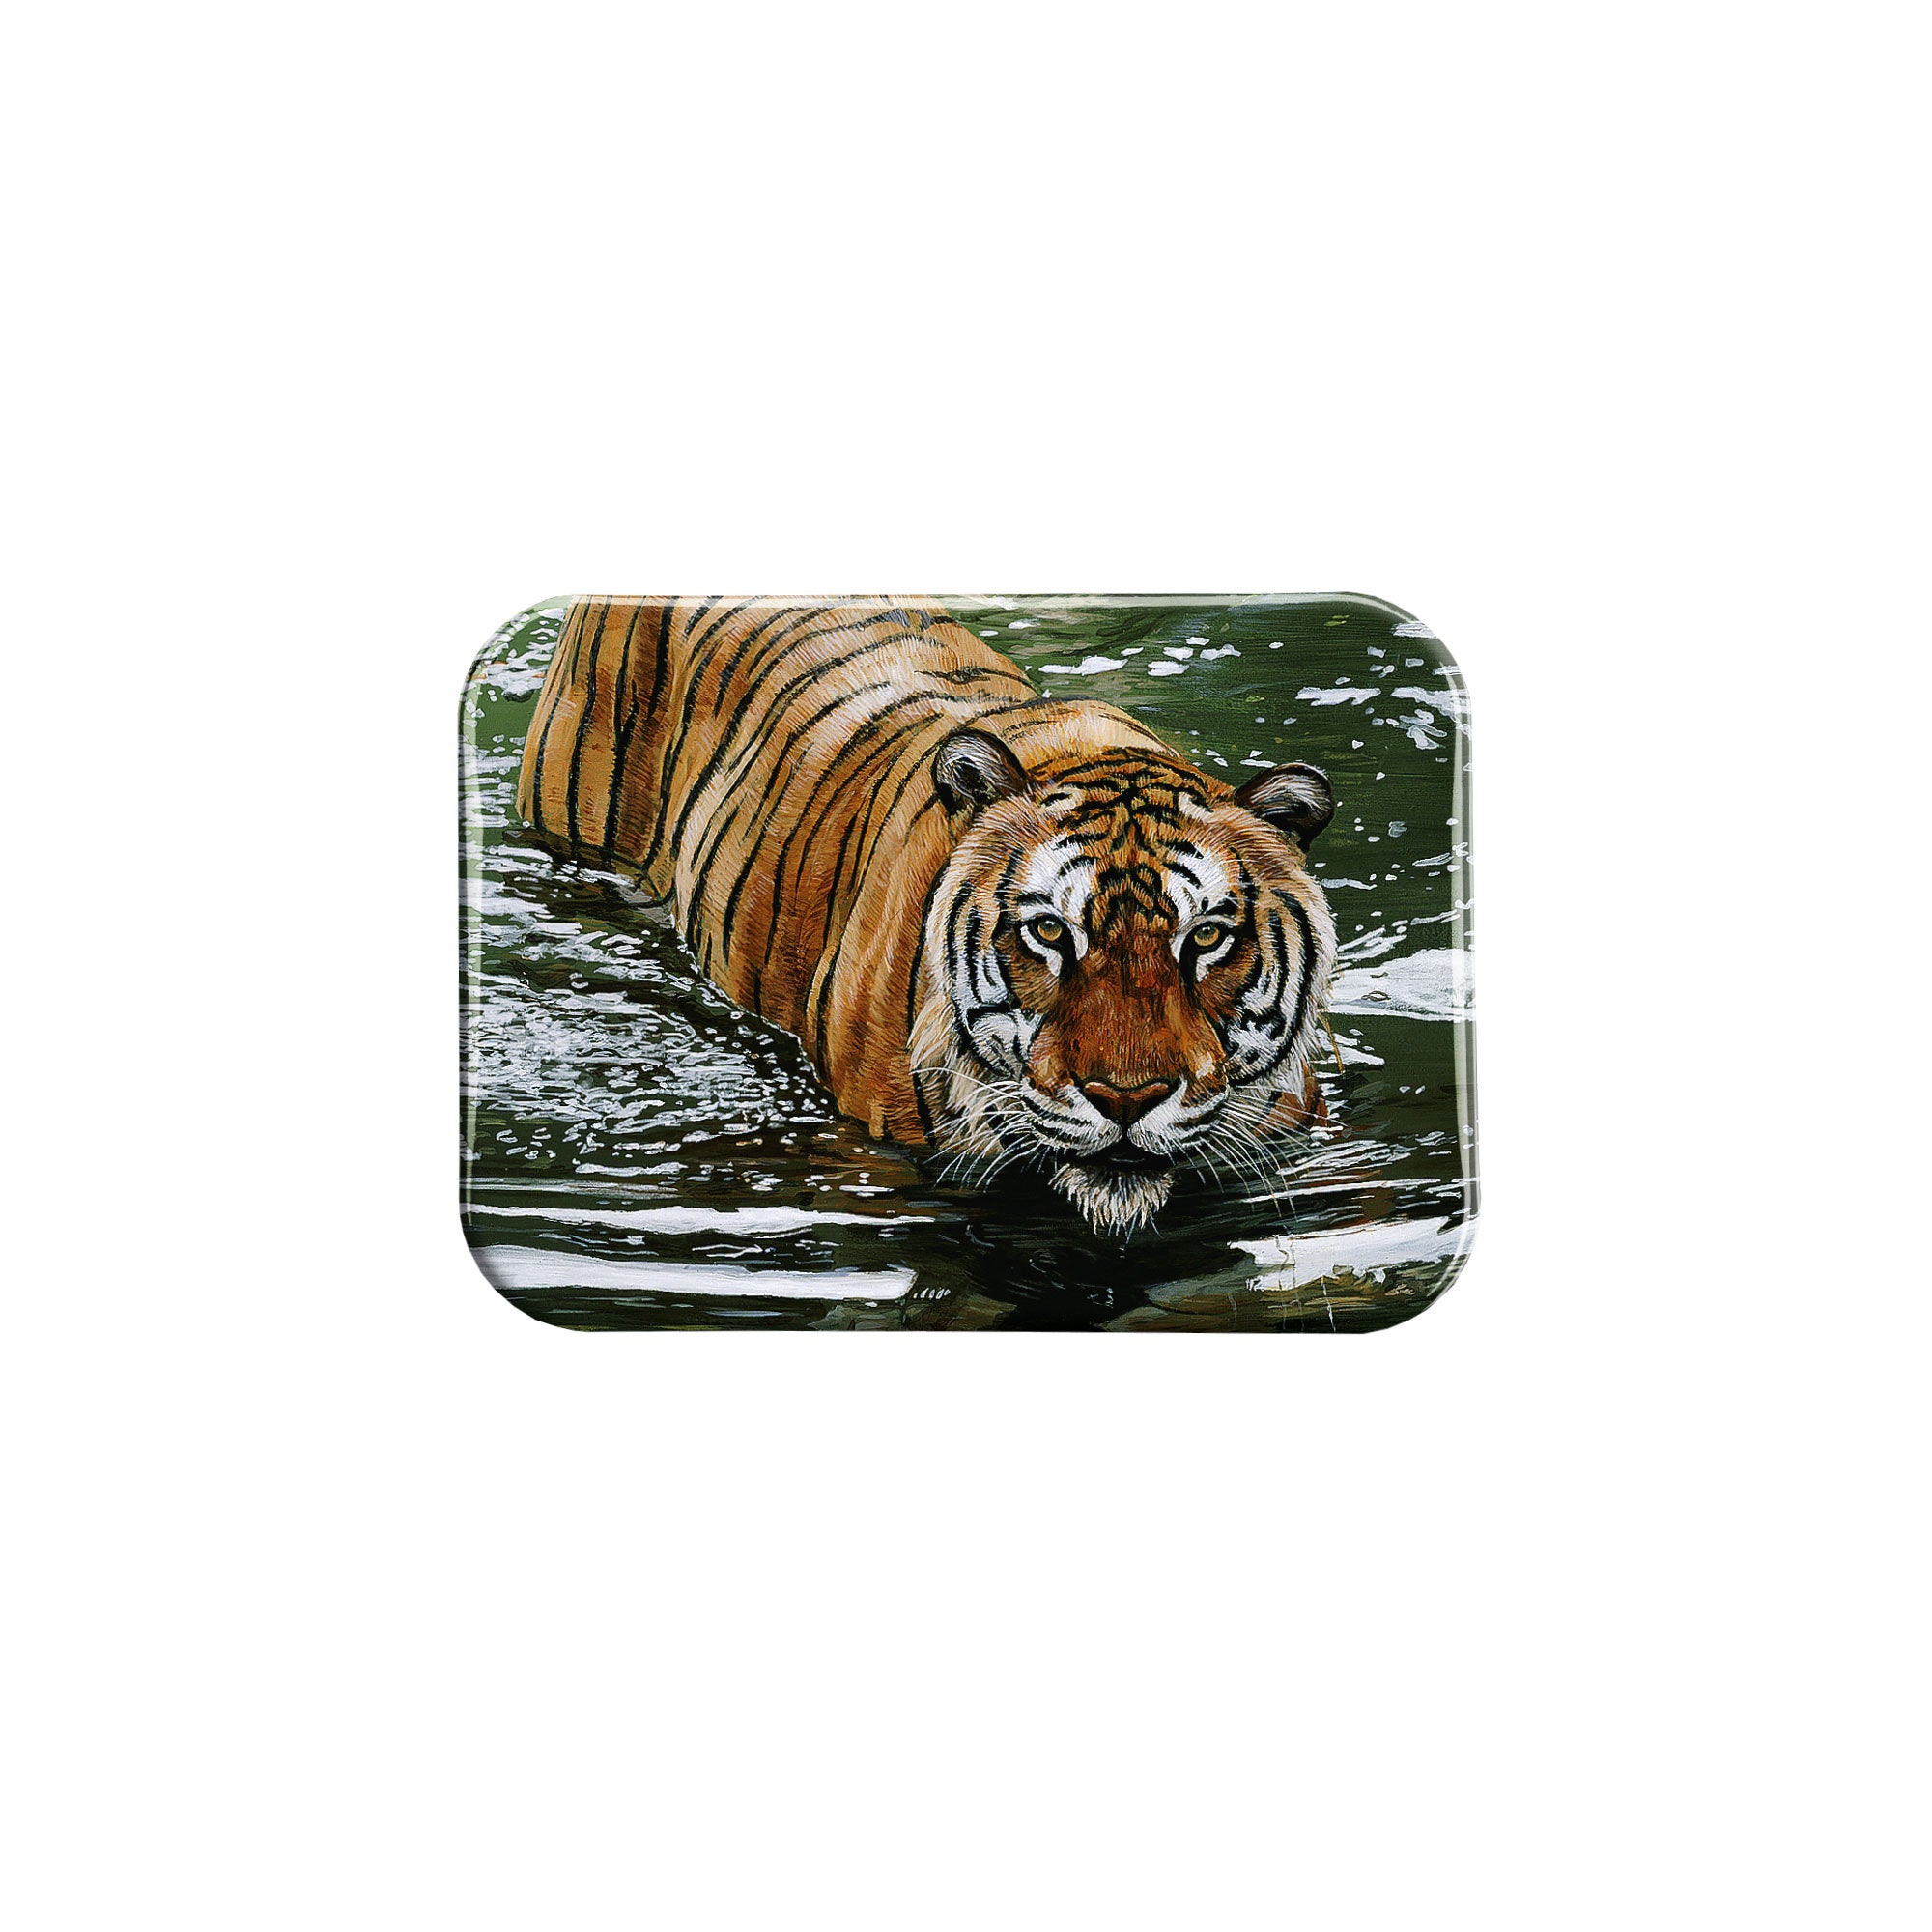 "Tiger in Water" - 2.5" X 3.5" Rectangle Fridge Magnets